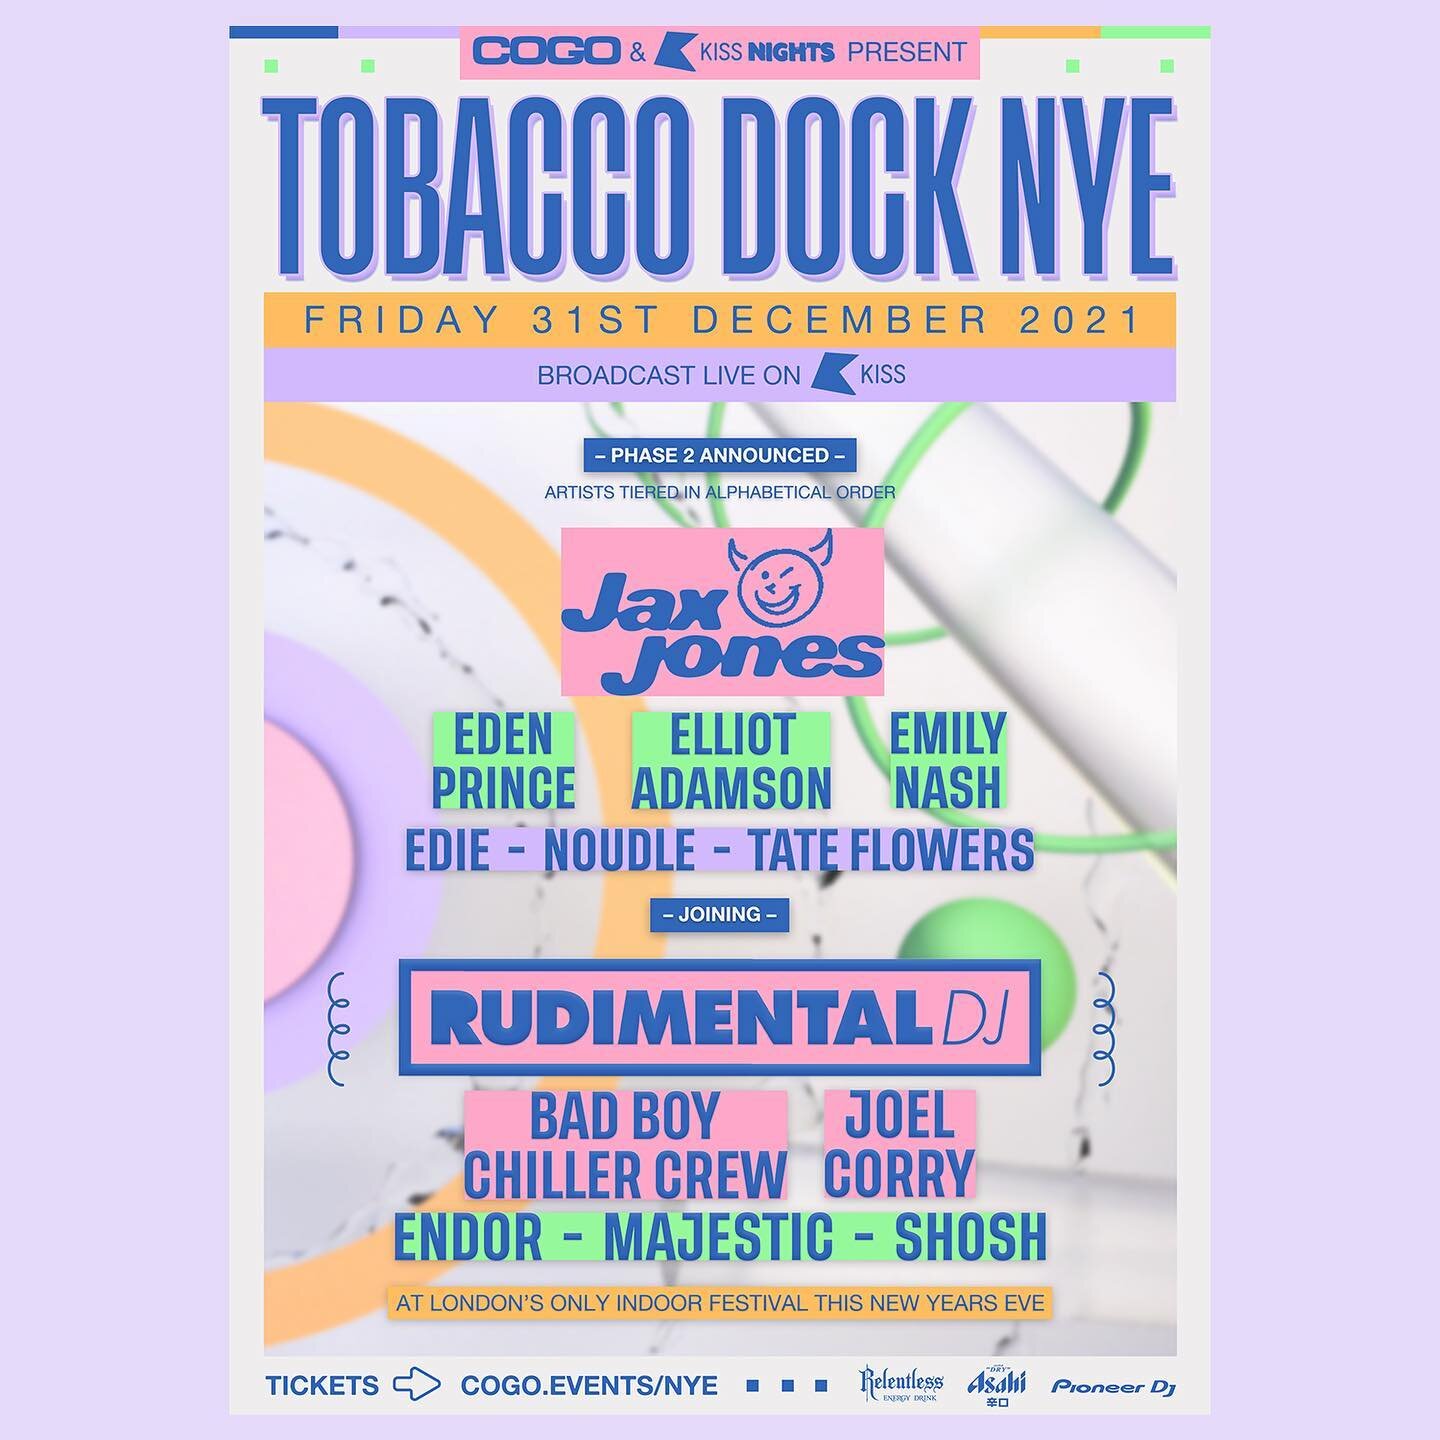 .
Cats out the bag!!!!!! My biggest event to date‼️
This New Year&rsquo;s Eve 2021 I will be DJing for @cogo_london and @kissfmuk at the legendary @tobaccodock ! The entire event will be broadcasted across KISS FM LIVE TOO! Thank you to COGO and @l_w